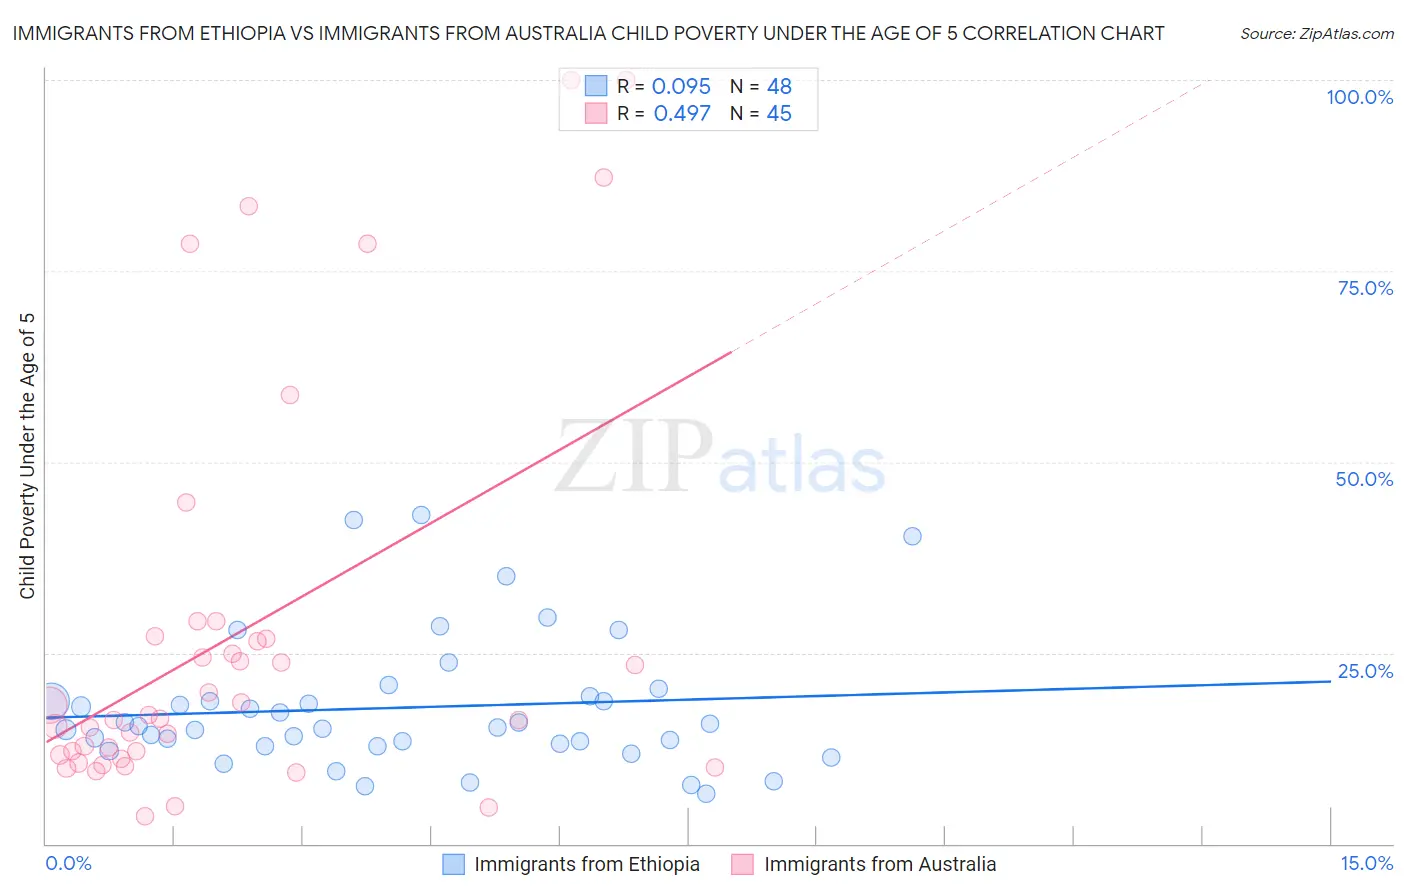 Immigrants from Ethiopia vs Immigrants from Australia Child Poverty Under the Age of 5